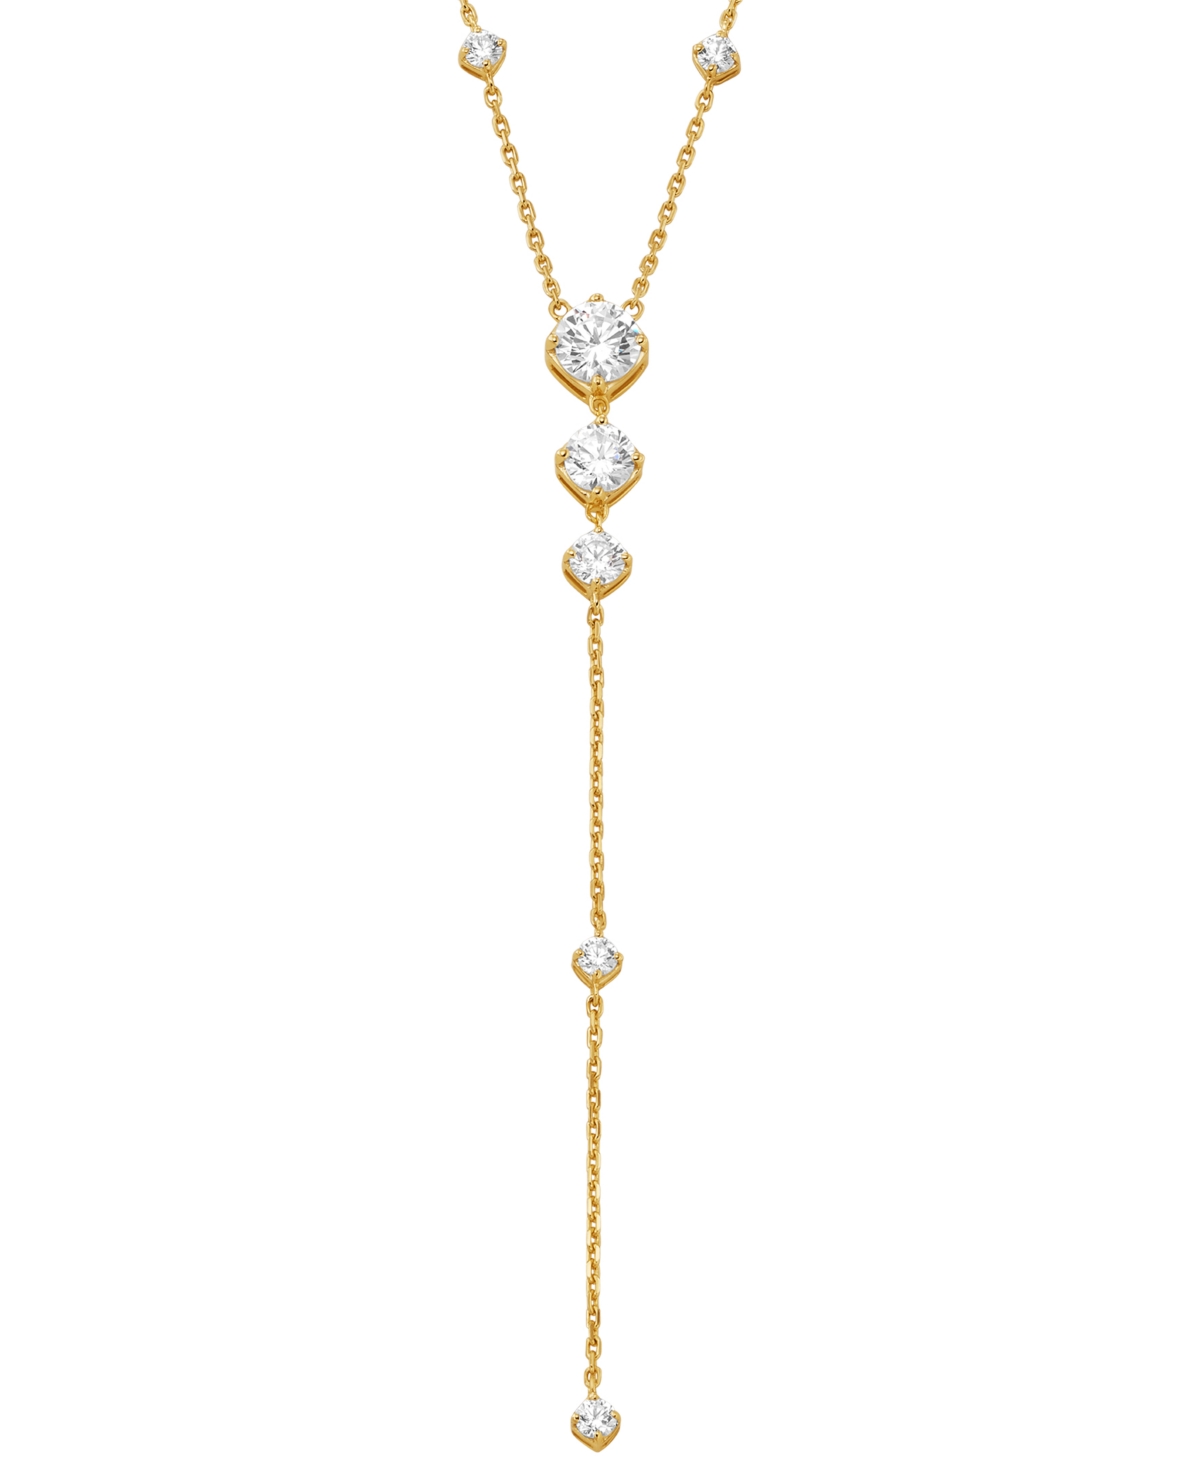 MICHAEL KORS 14K GOLD PLATED STERLING SILVER LARIAT NECKLACE